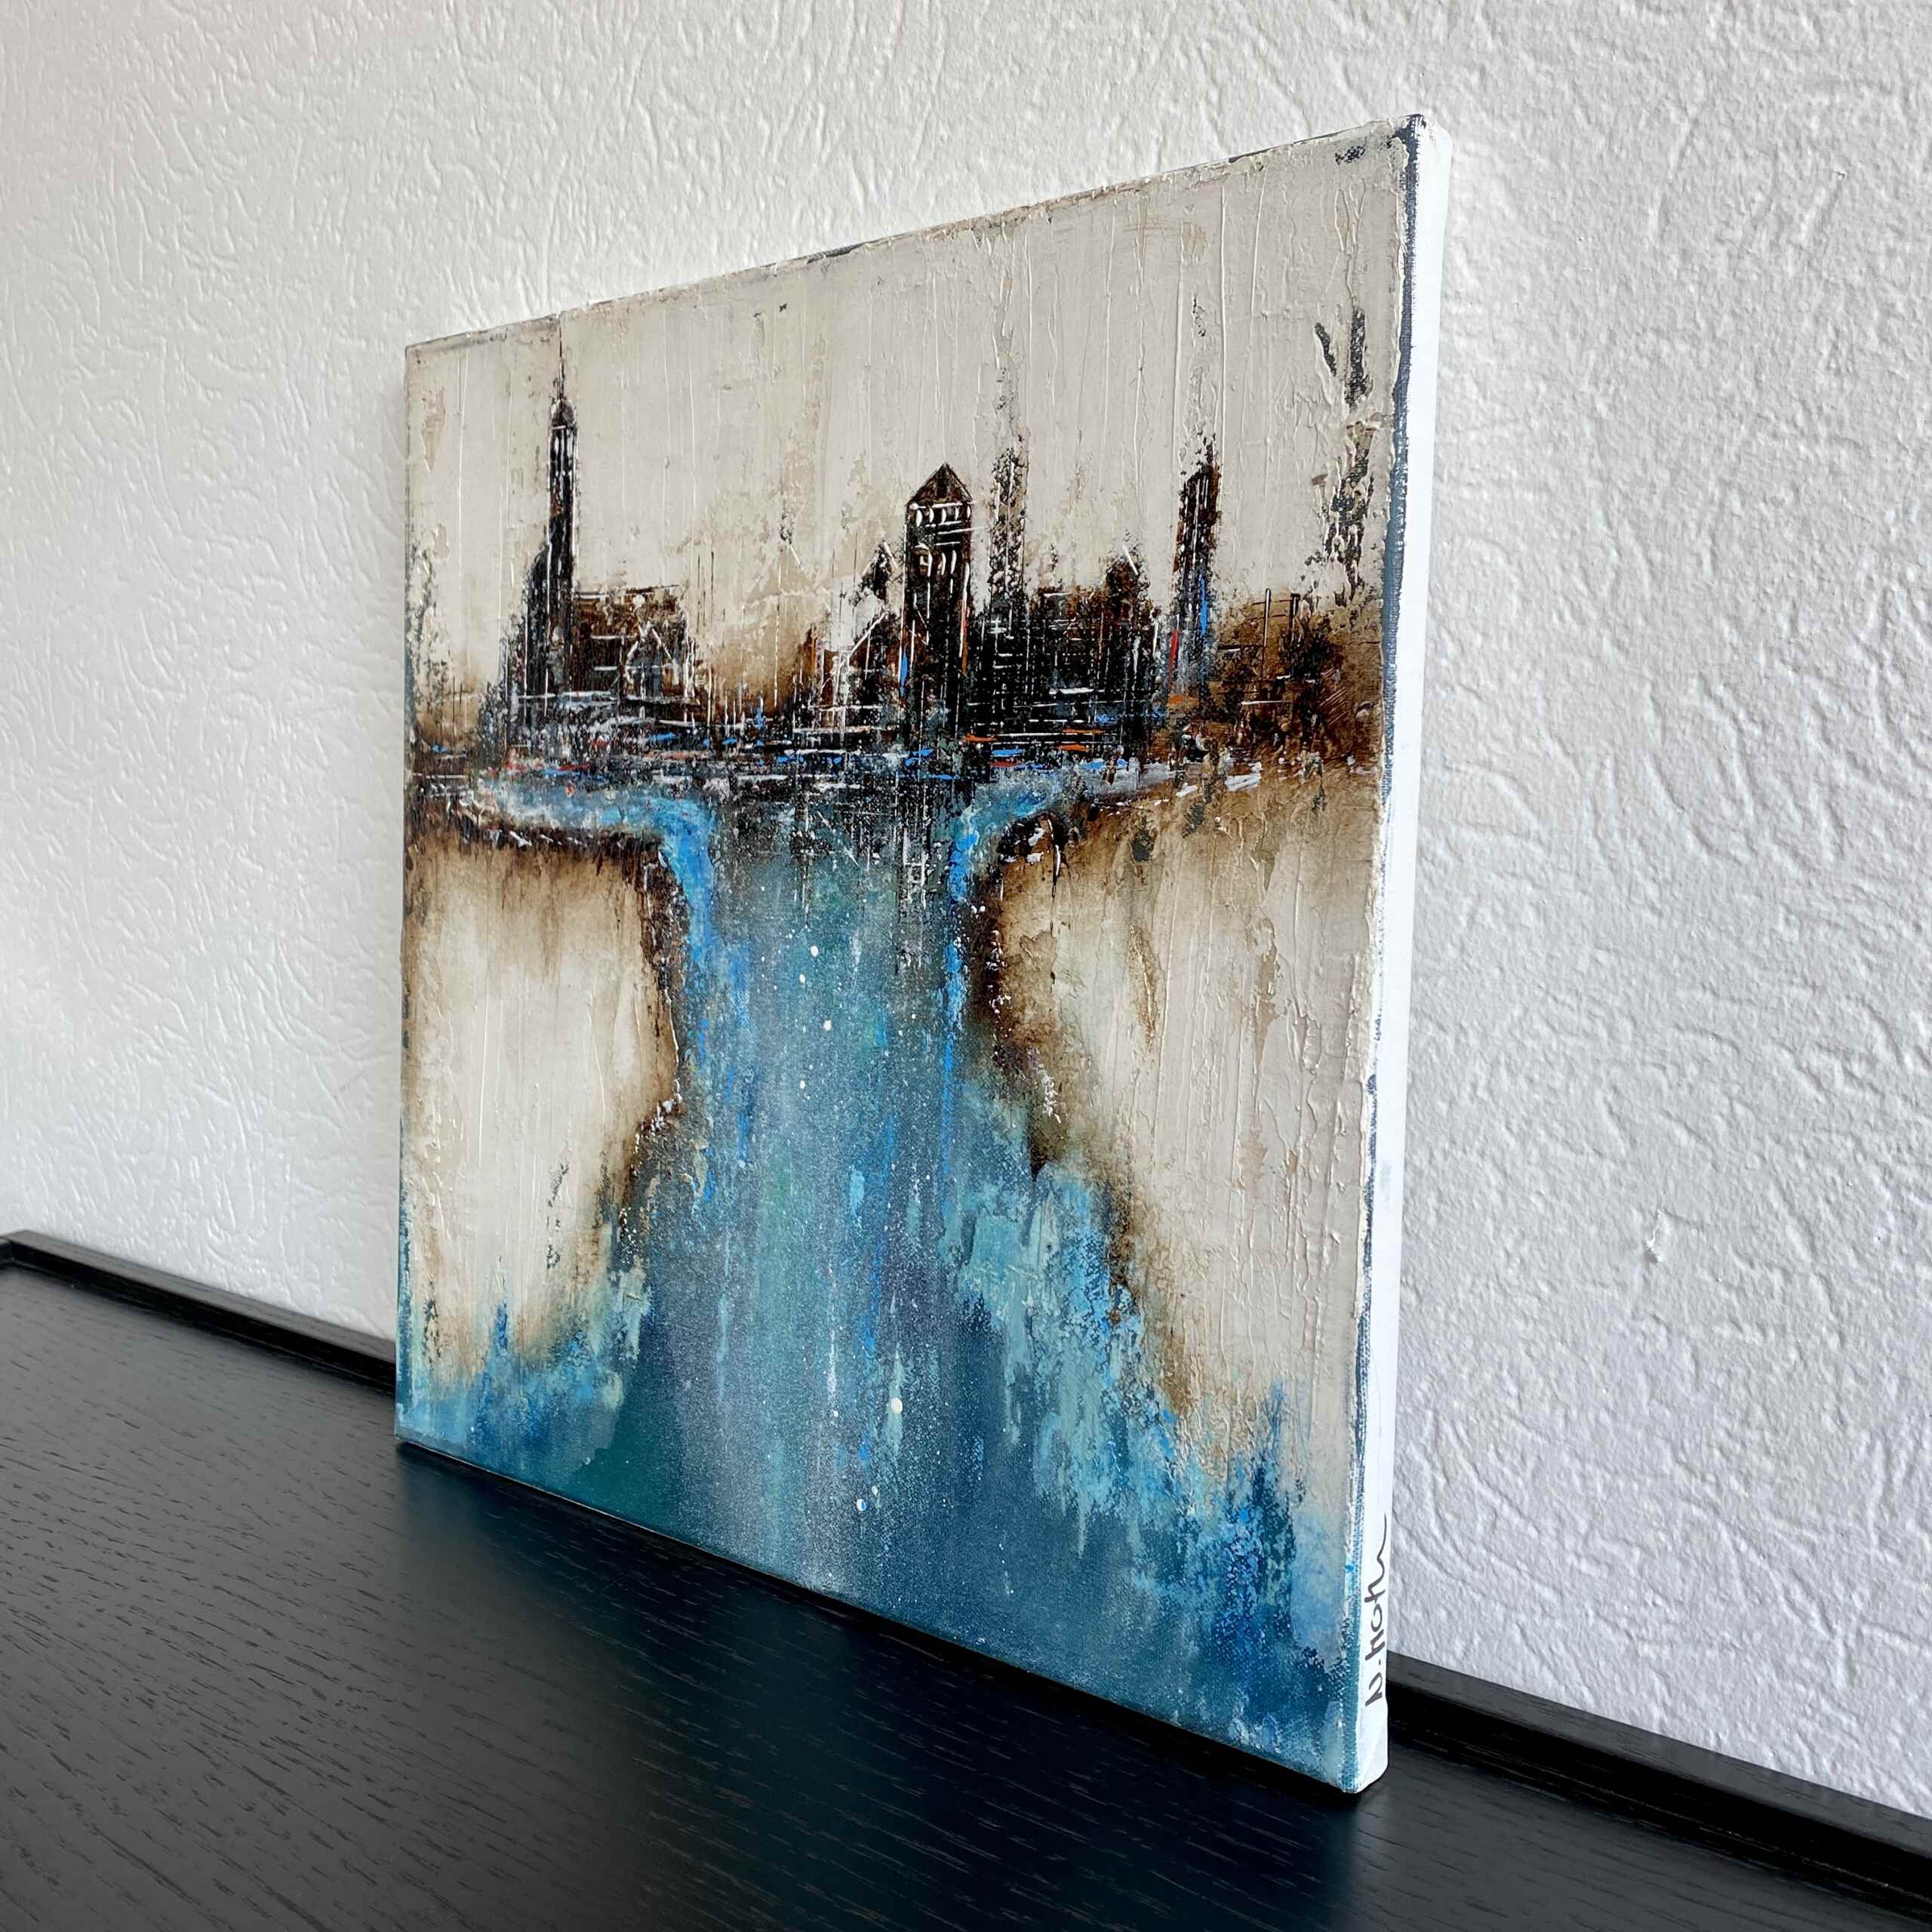 Side view of artwork "Elbe Impressions No 4" by Nina Groth